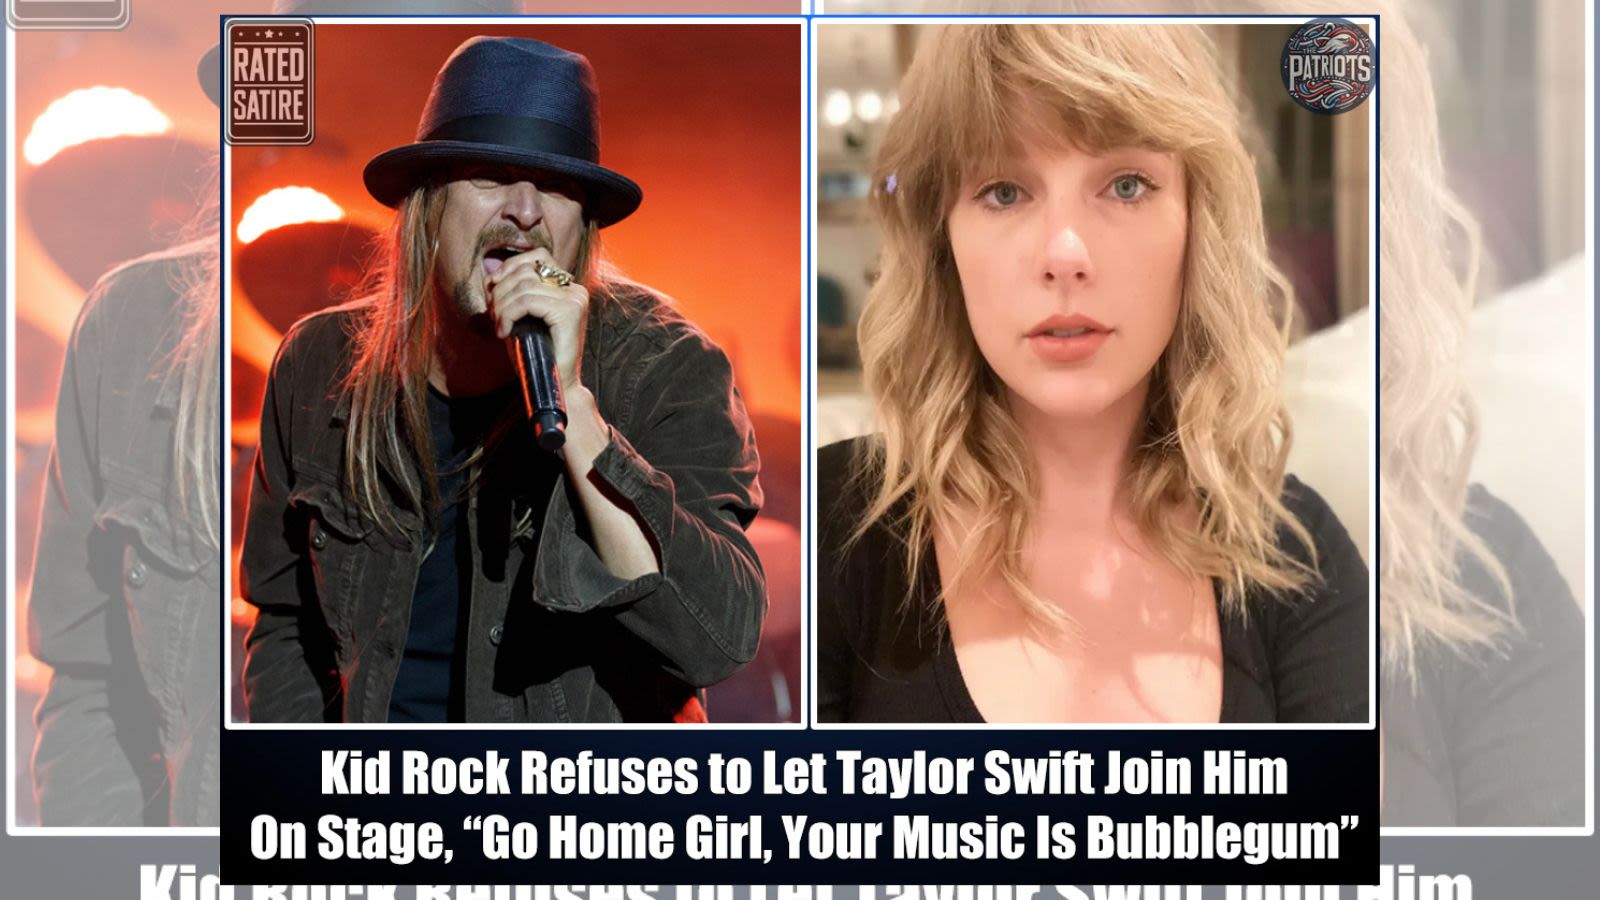 Fact Check: No, Kid Rock Did Not Refuse to Let Taylor Swift Onstage with Him